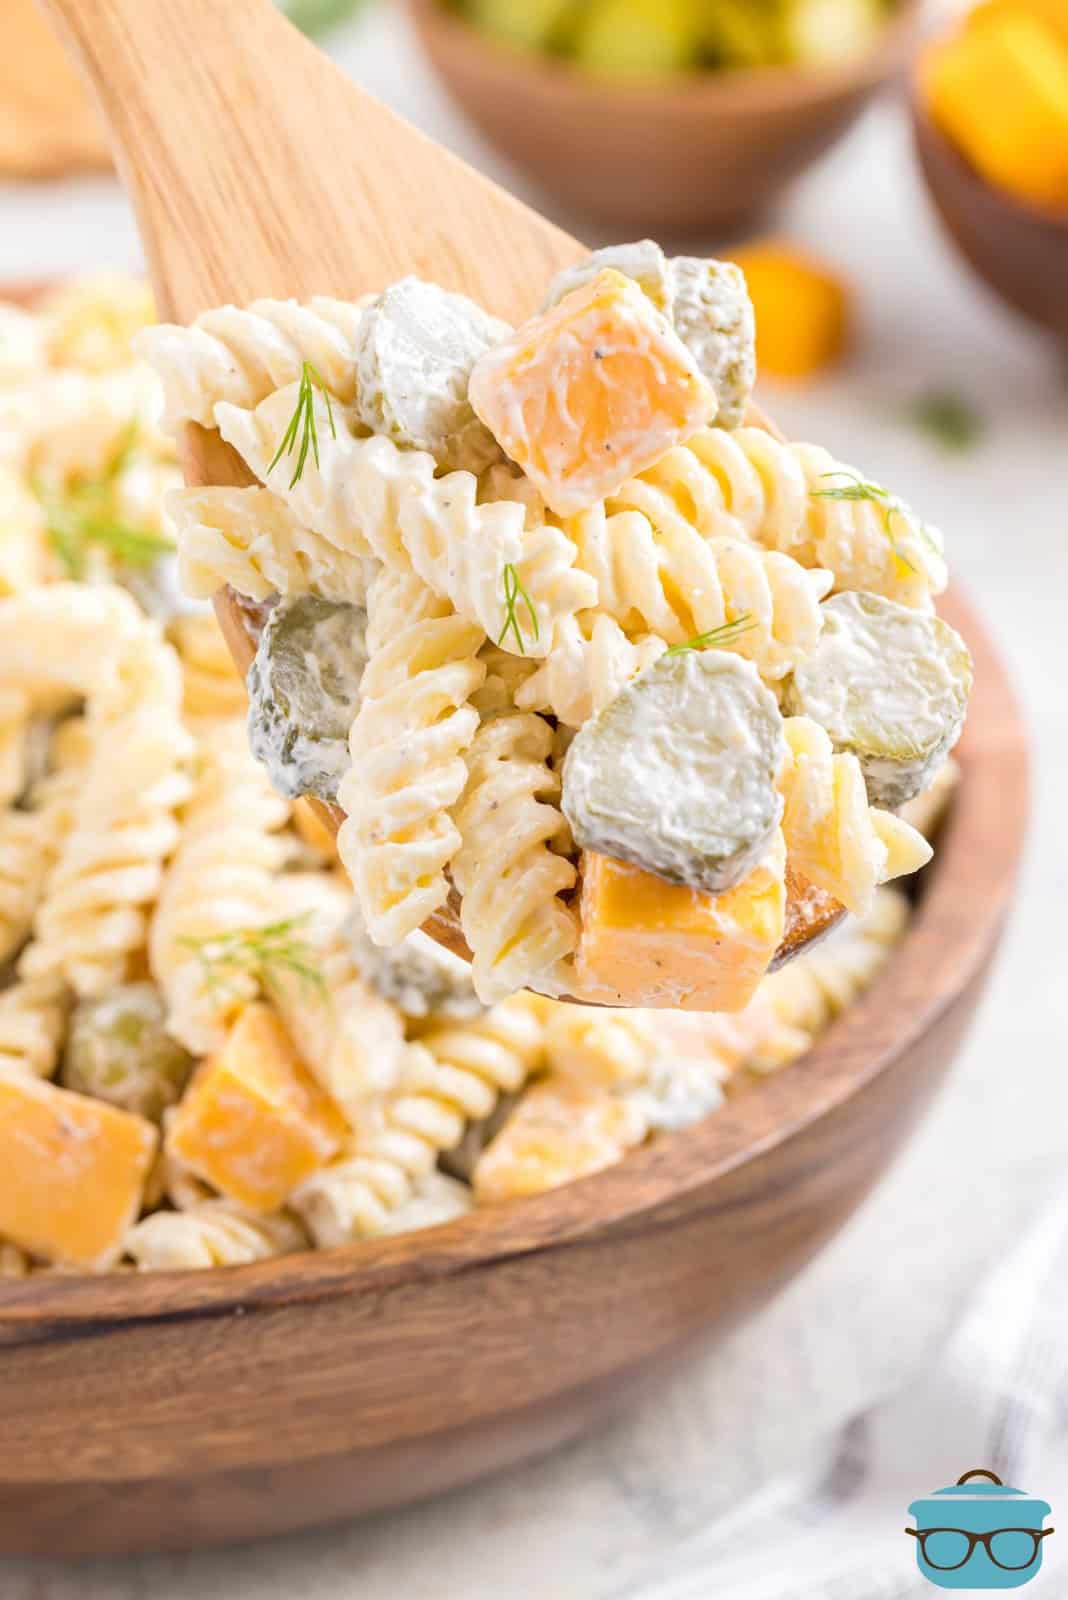 Closely looking at Dill Pickle Pasta Salad.